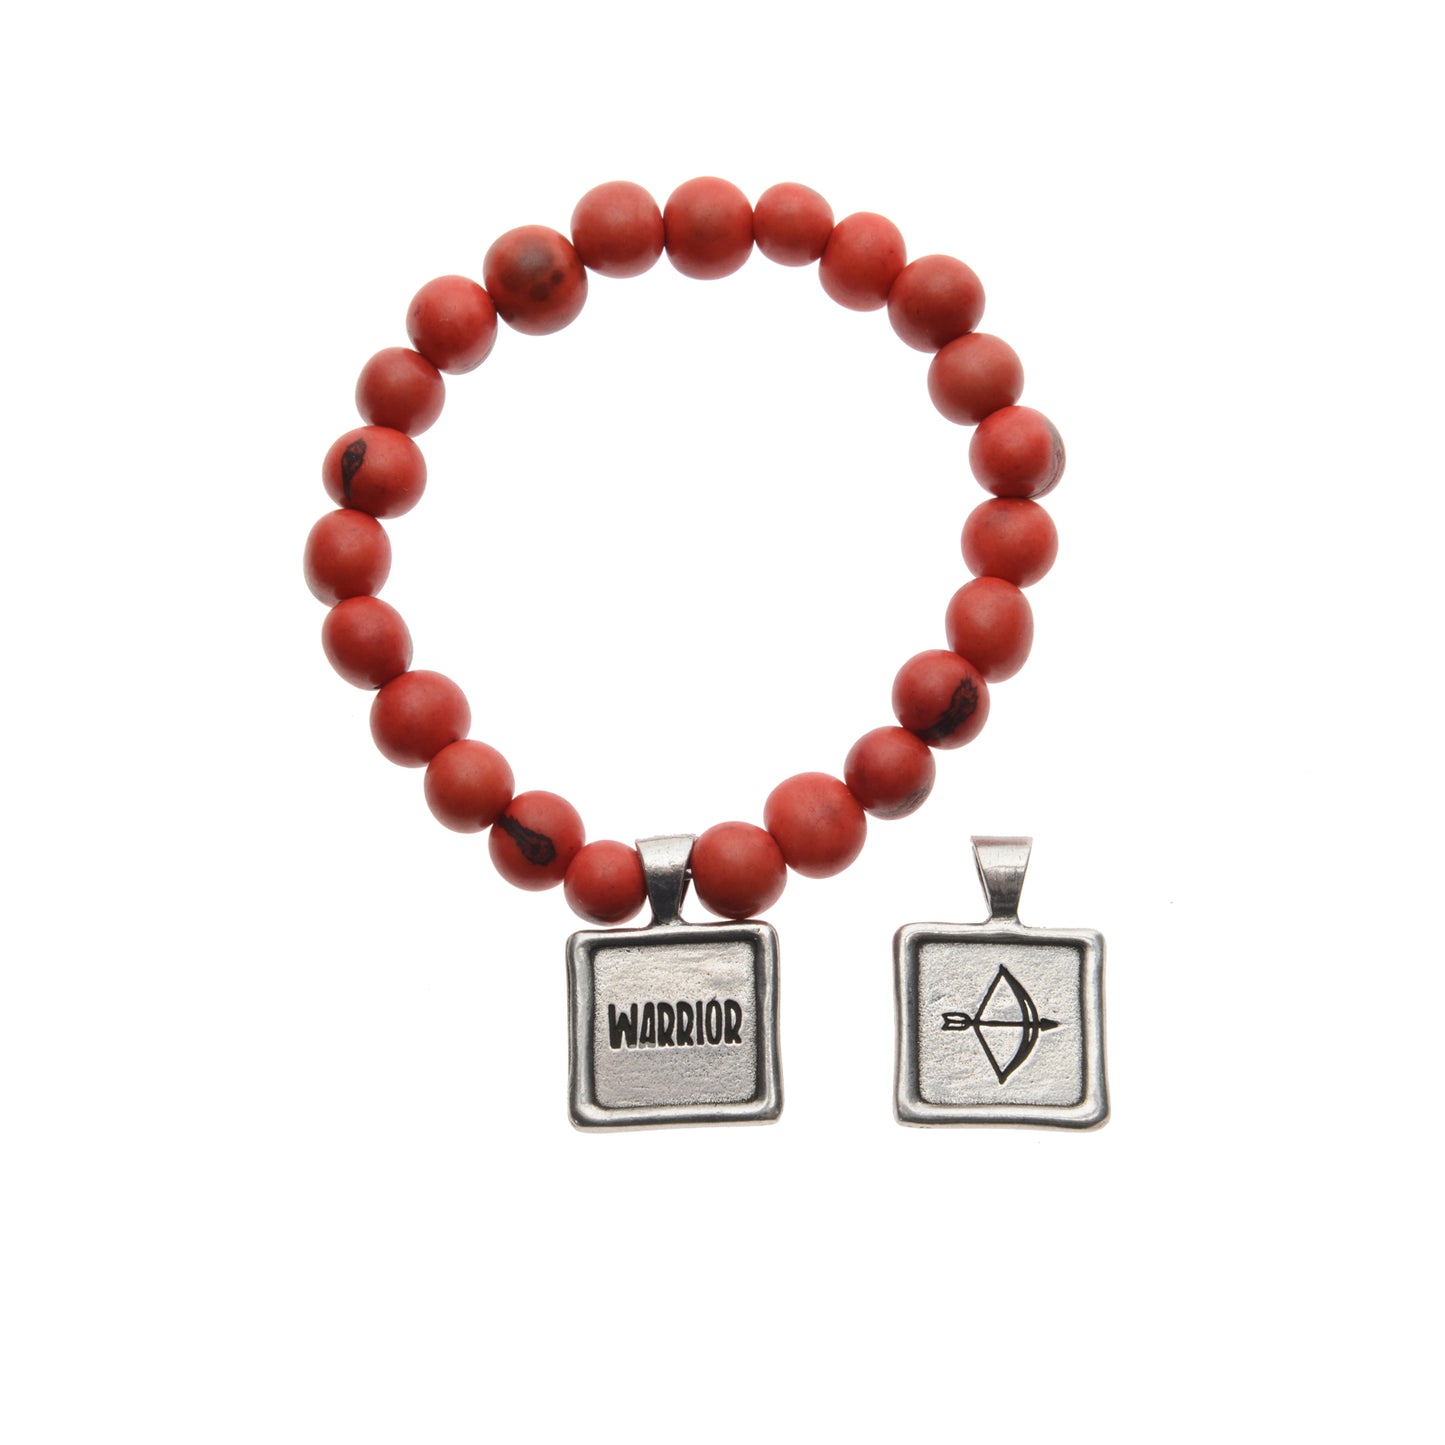 Acai Seeds of Life Bracelet with Wax Seal - Tiger Red Beads